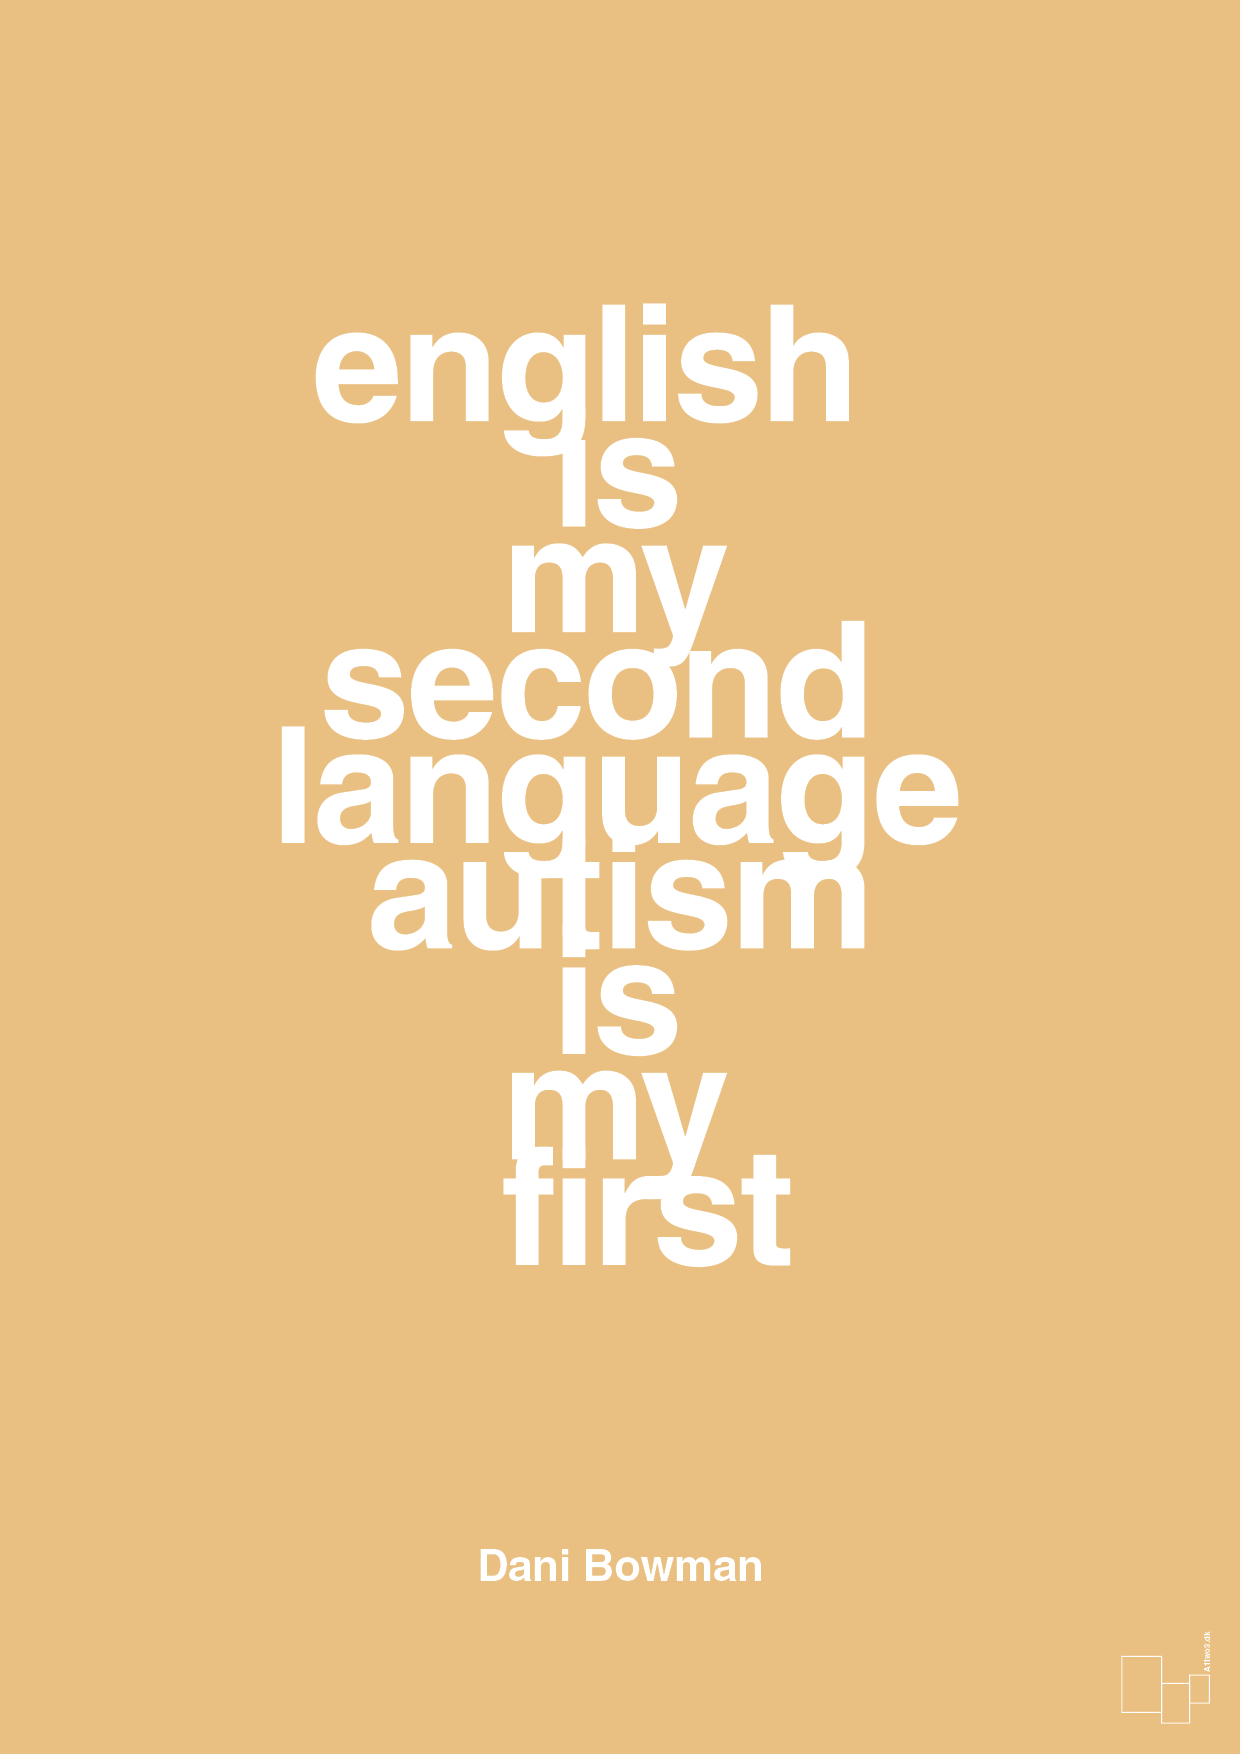 english is my second language autism is my first - Plakat med Samfund i Charismatic